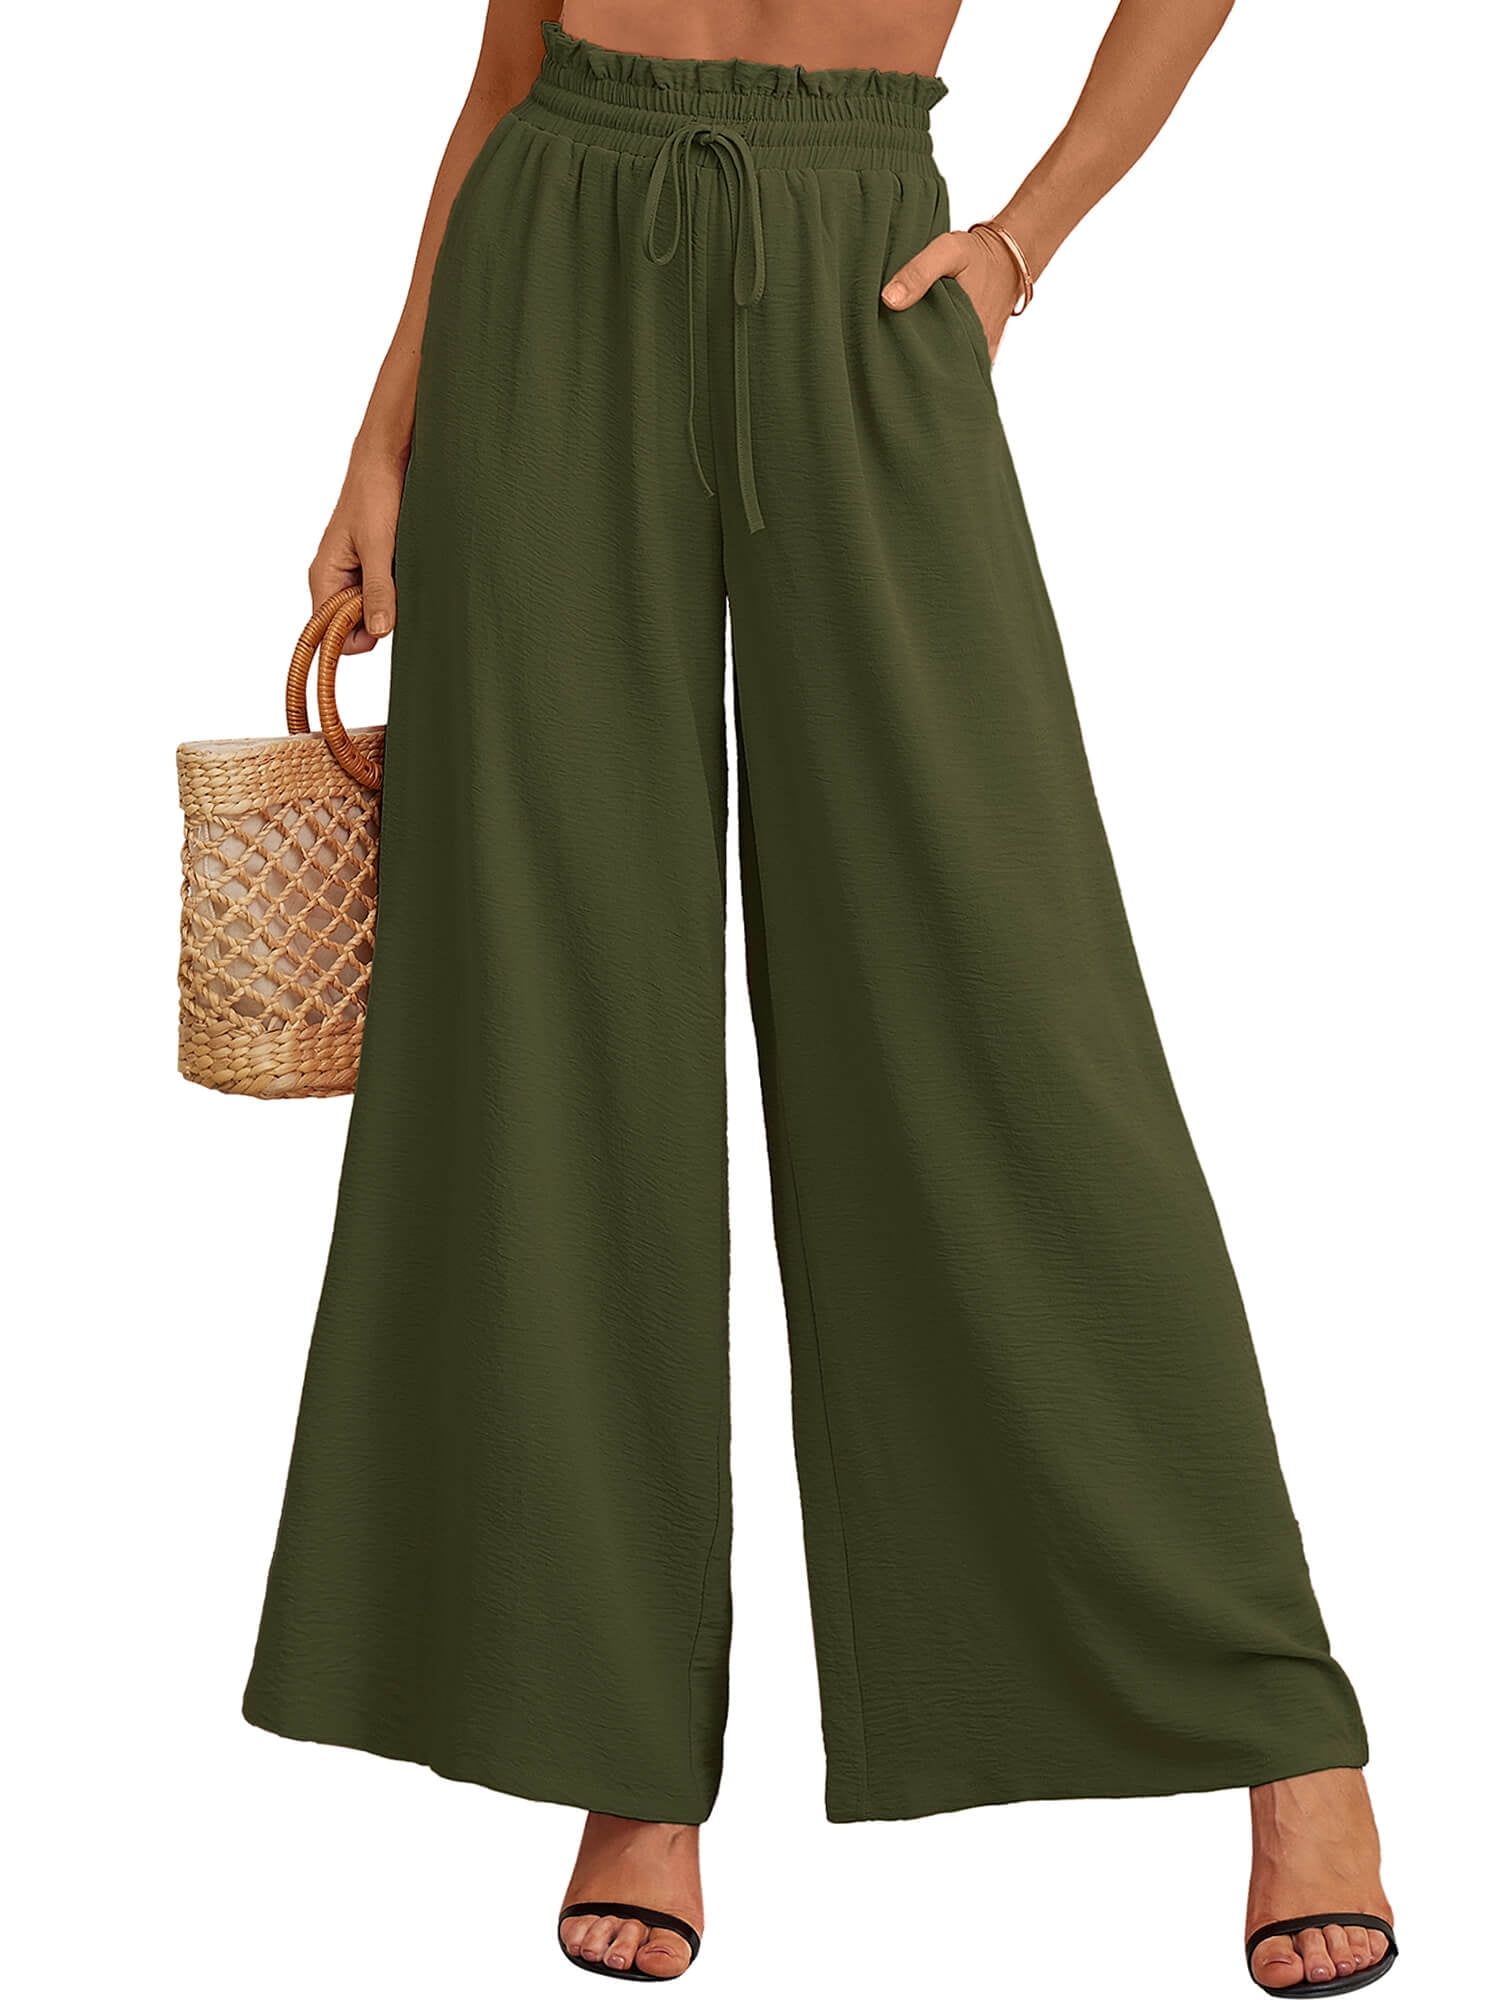 SHOWMALL Women's Pants Casual Elastic High Waisted Wide Leg Pants Olive ...